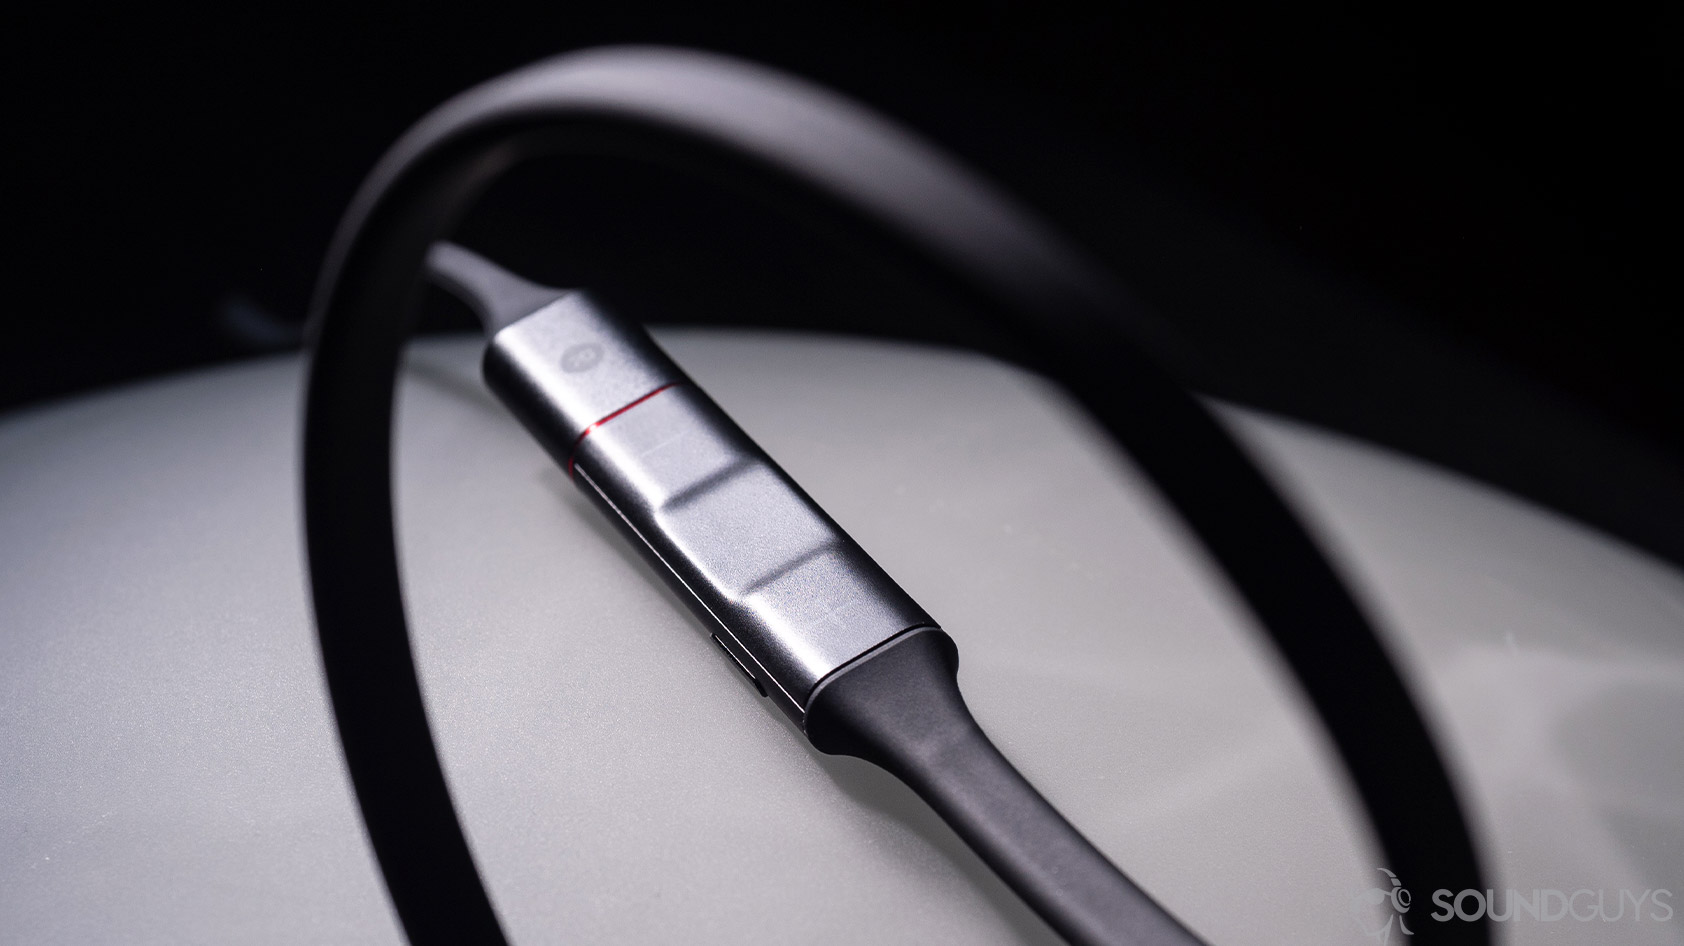 Huawei Freelace: close-up image of the three-button mic and remote module.